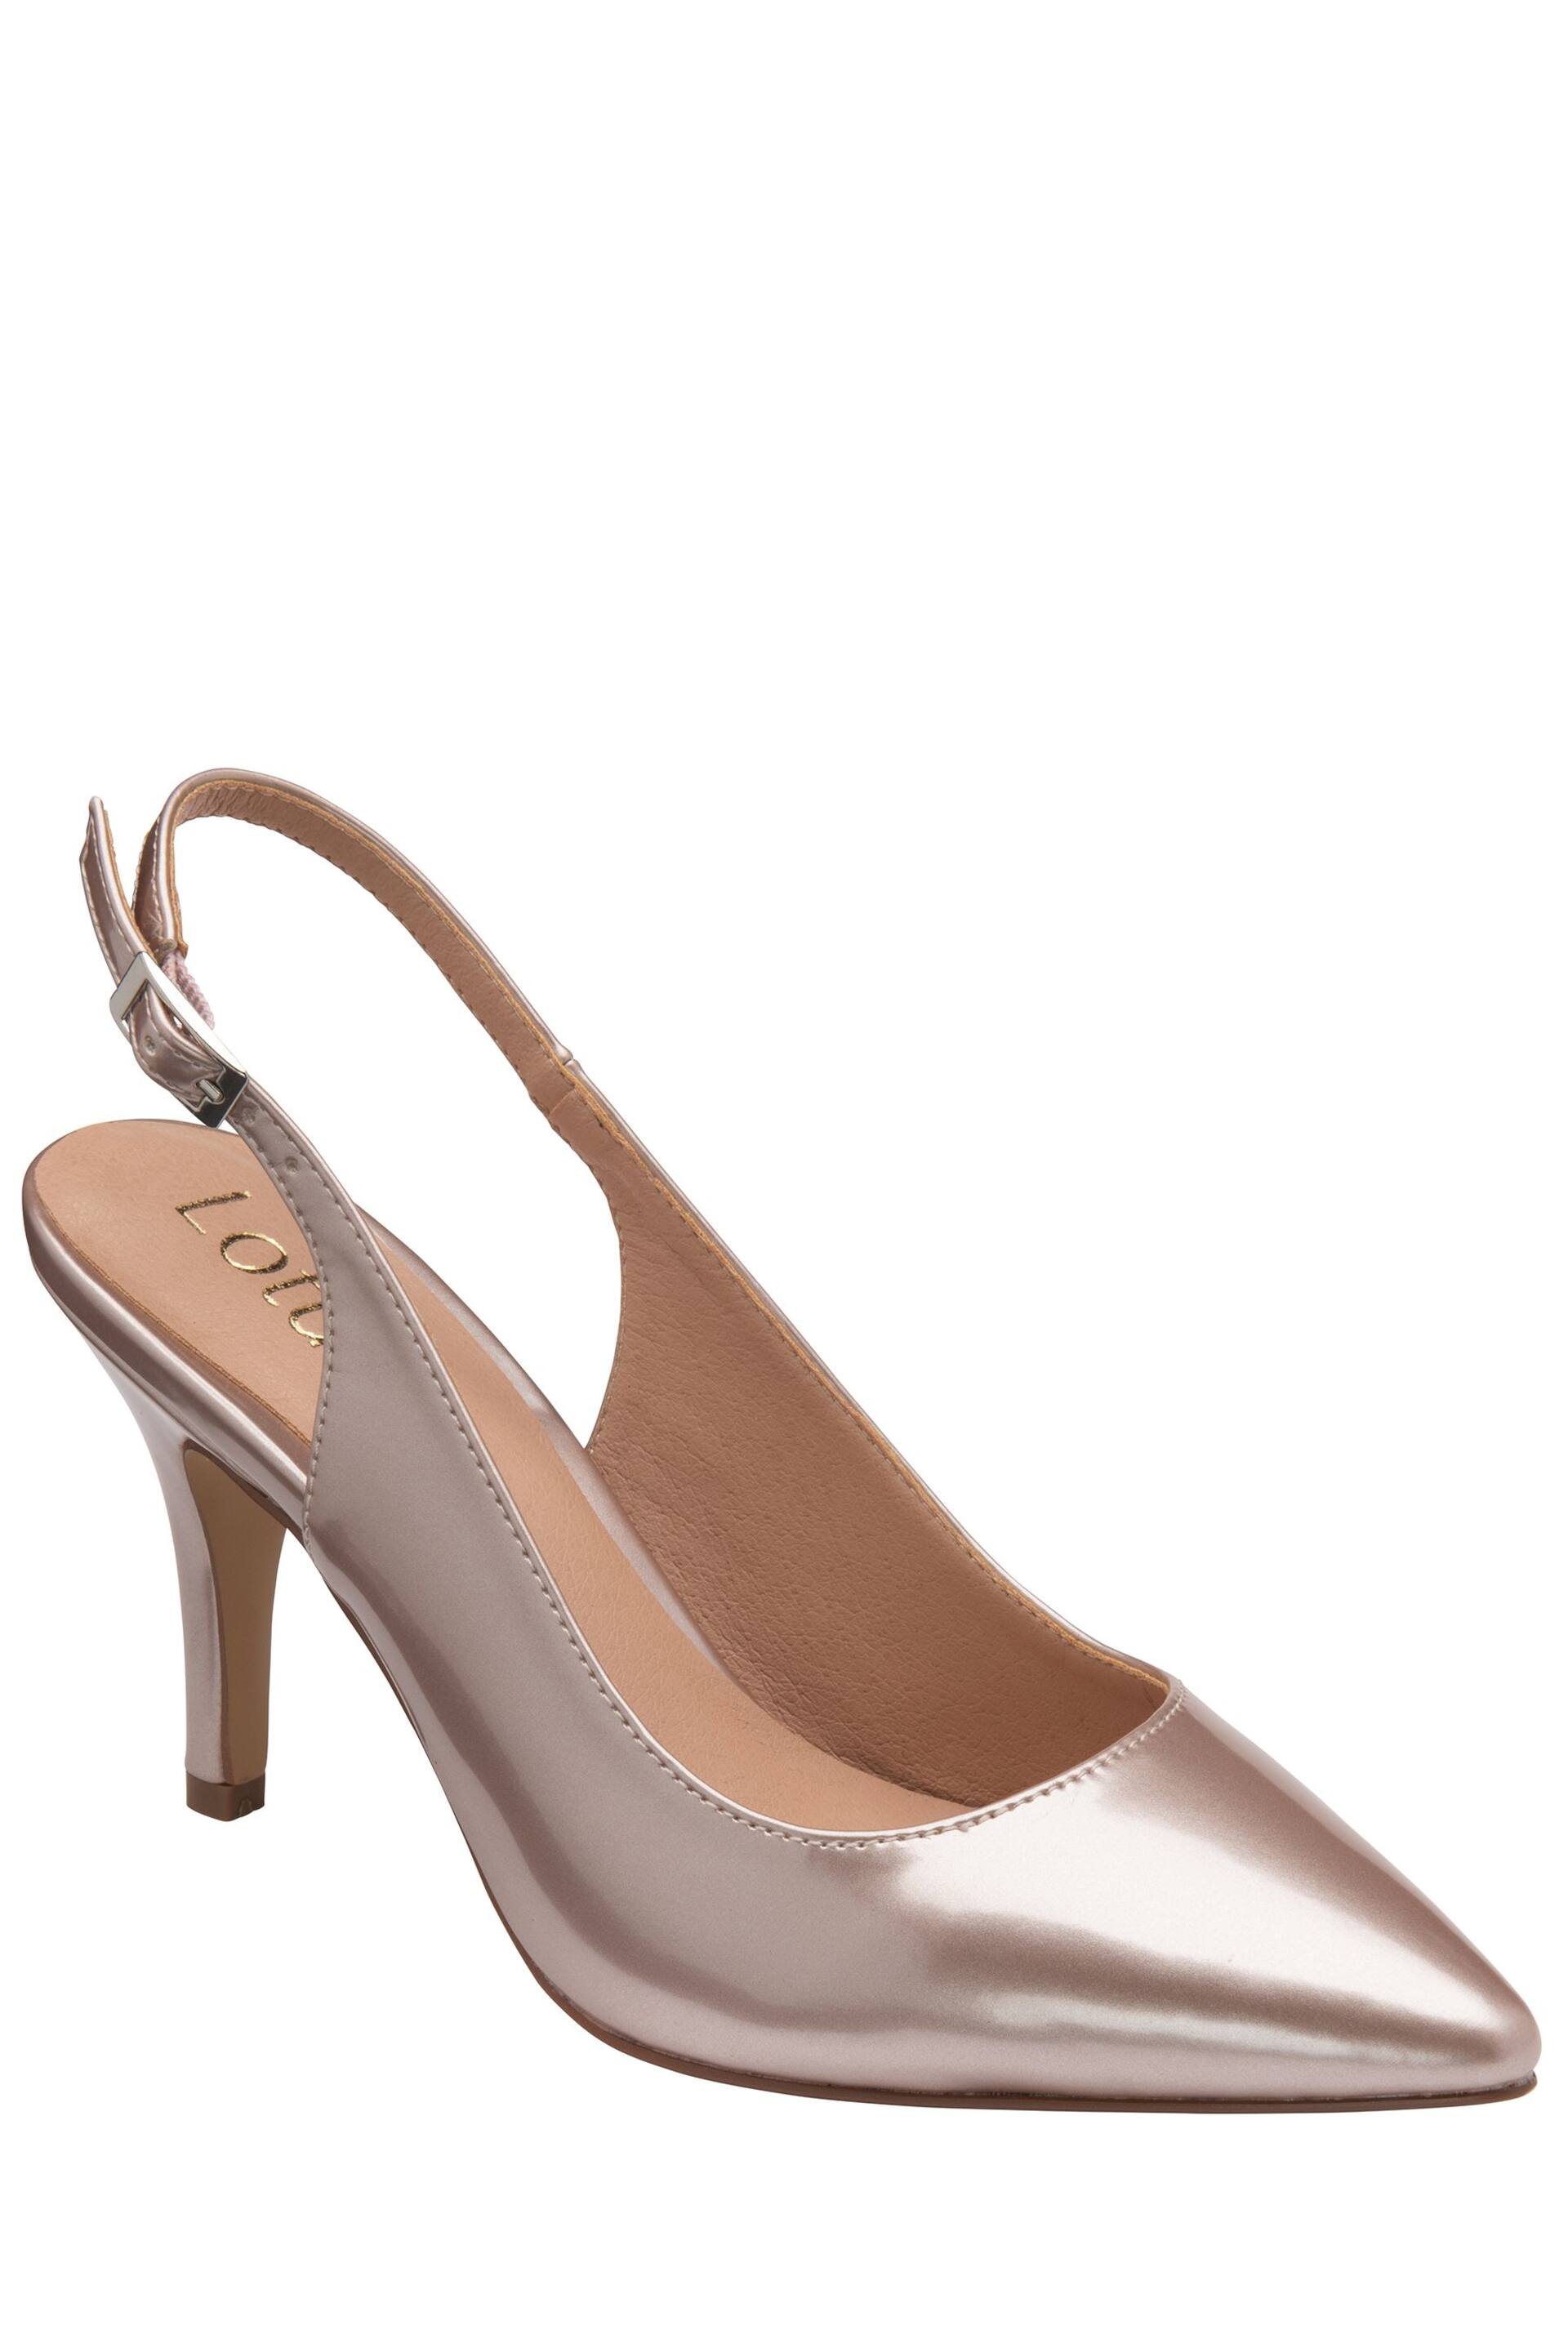 Lotus Pink Slingback Court Shoes - Image 1 of 4